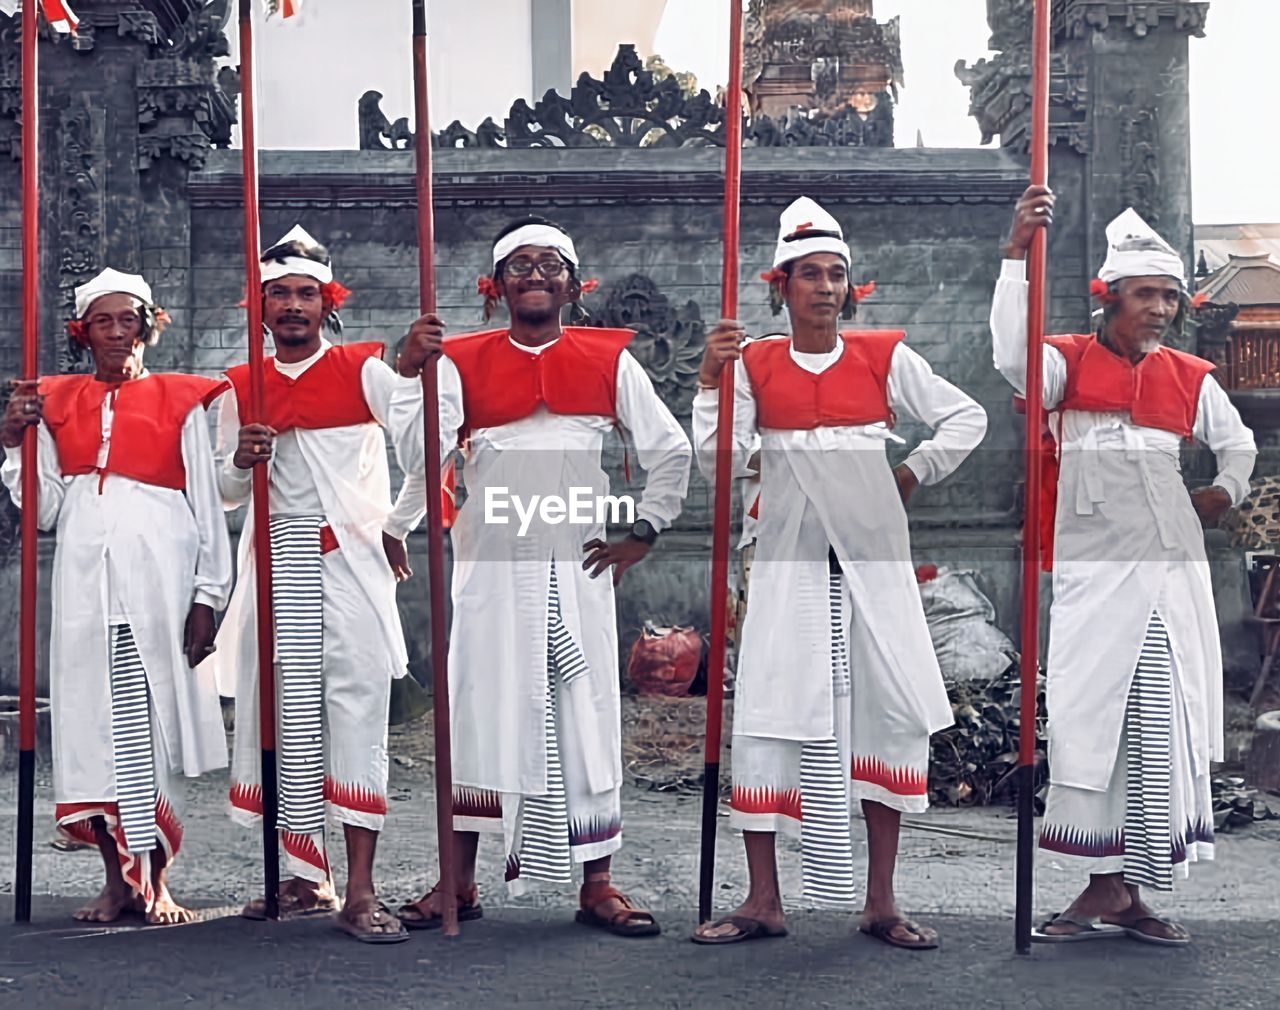 group of people, clothing, full length, person, architecture, tradition, men, traditional clothing, musician, adult, headwear, day, sports, outdoors, performance, uniform, standing, history, city